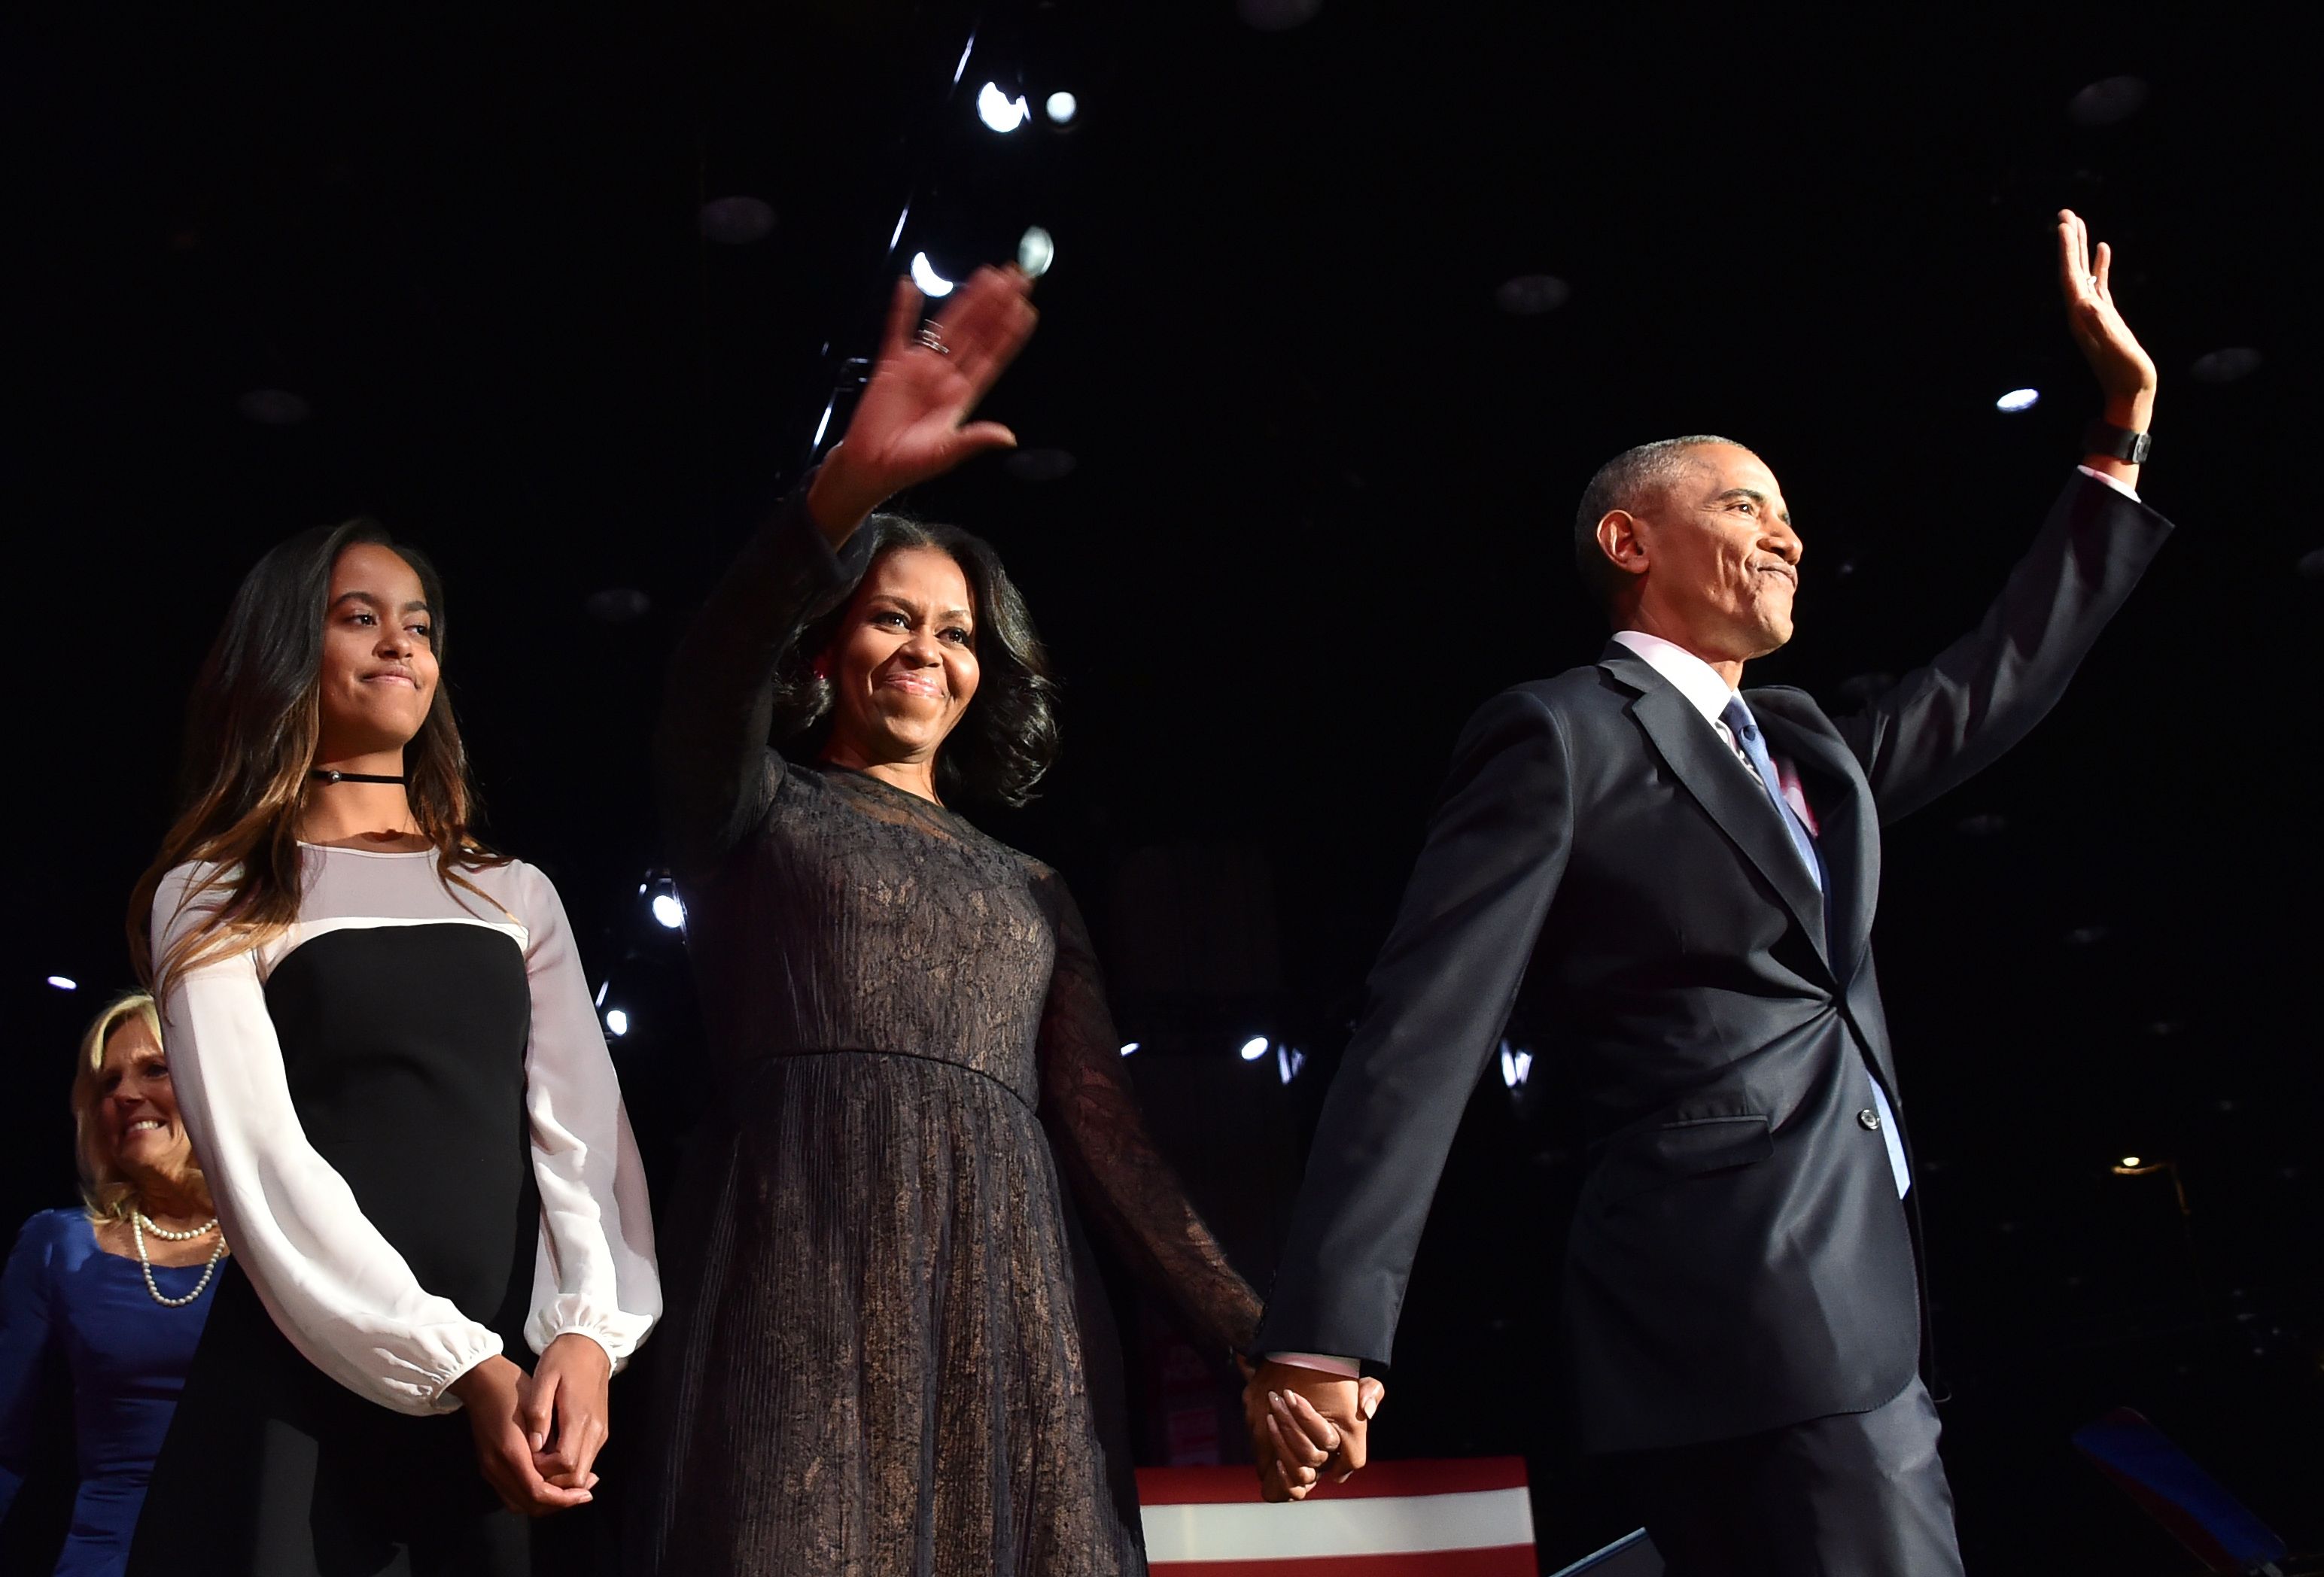 Malia looks at the crowd as Michelle Obama and Barack Obama wave to supporters on January 10, 2017, in Chicago, Illinois. | Source: Getty Images